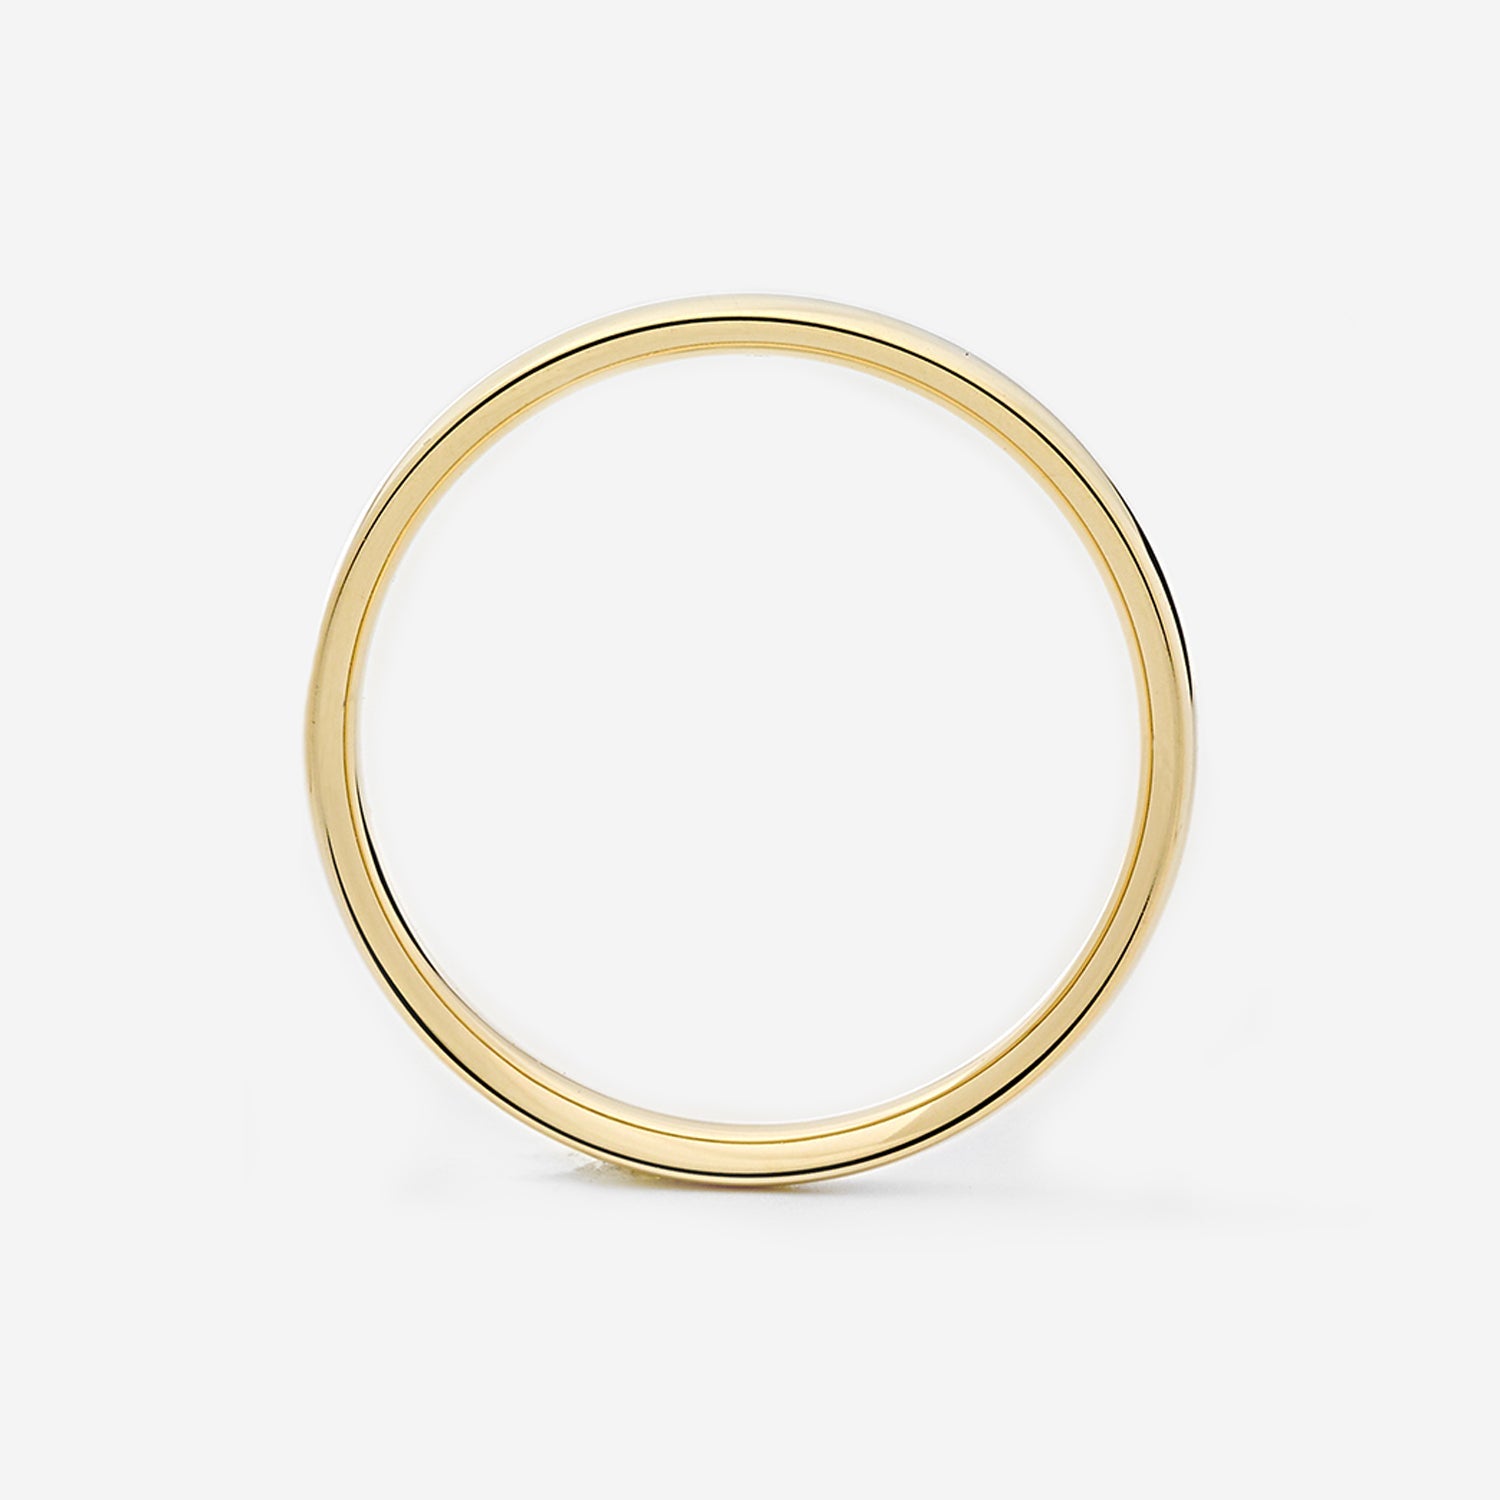 886 Royal Mint Rings 886 Fine Band Ring in 9ct Yellow Gold